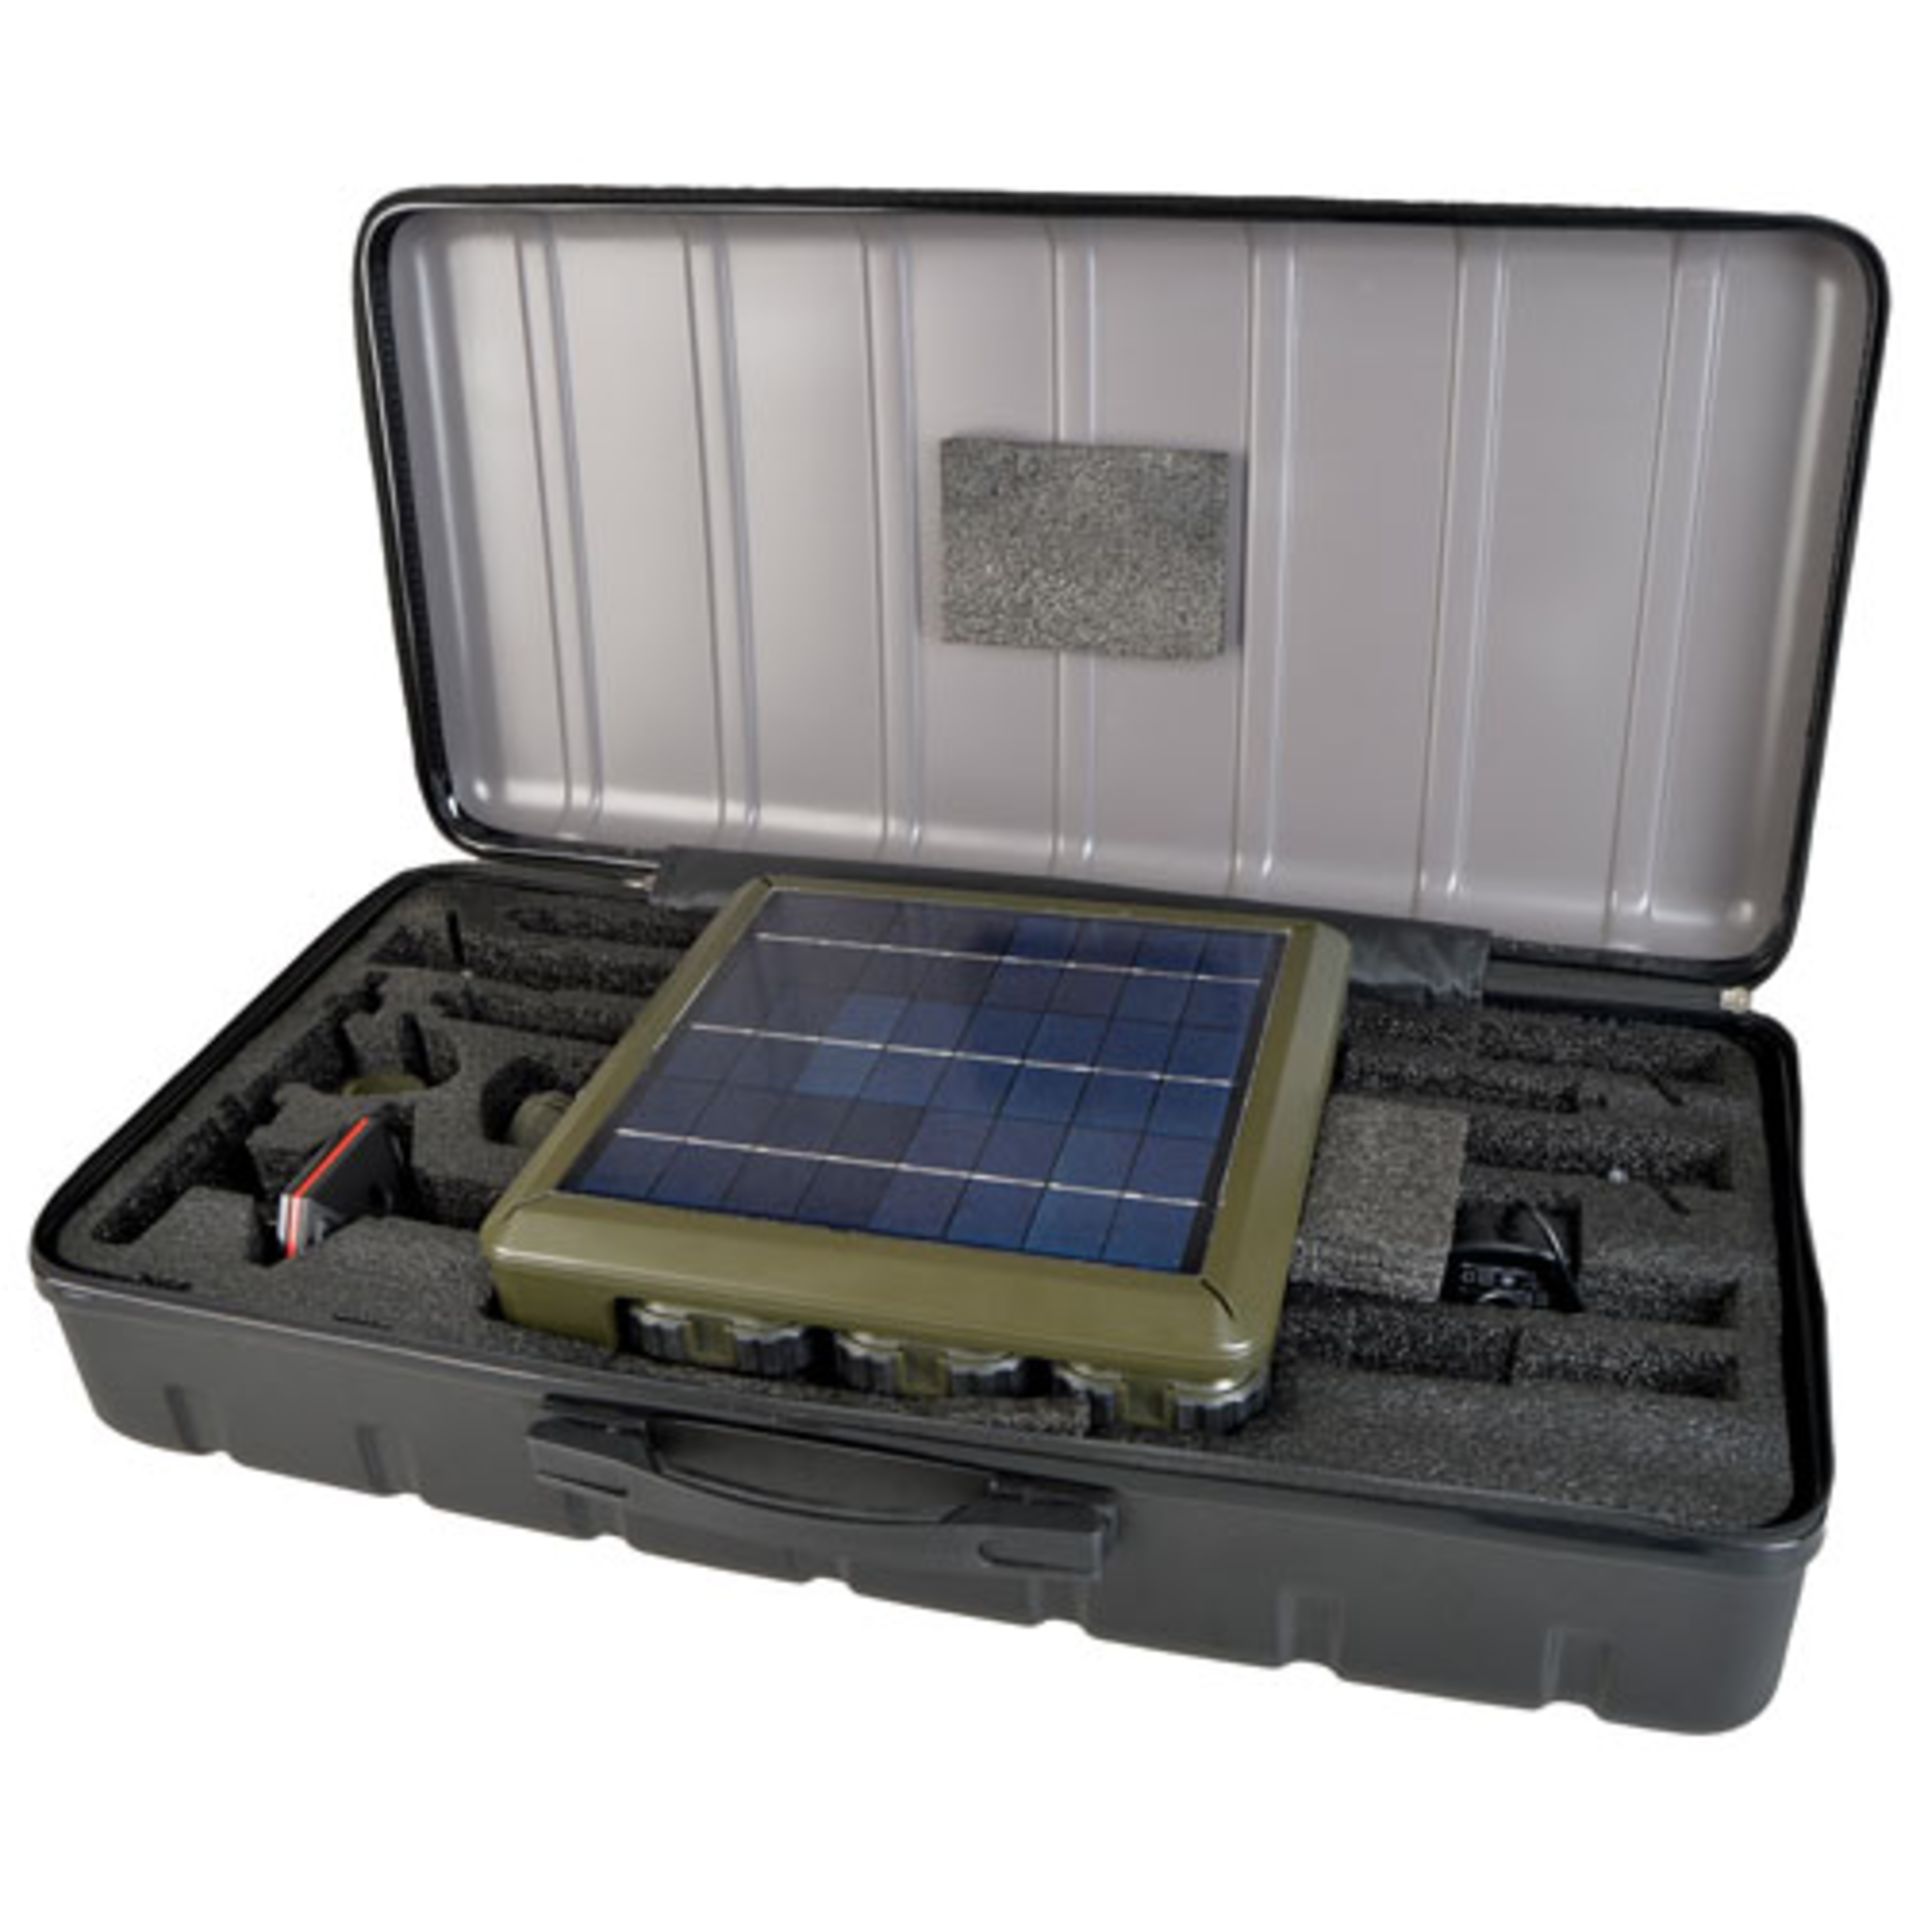 UNITS - SOLAR RECHARGEABLE LED HIGH LUMEN WORKING LIGHT / CAMPING LIGHT KIT (NEW) (MSRP $300) - Image 3 of 9